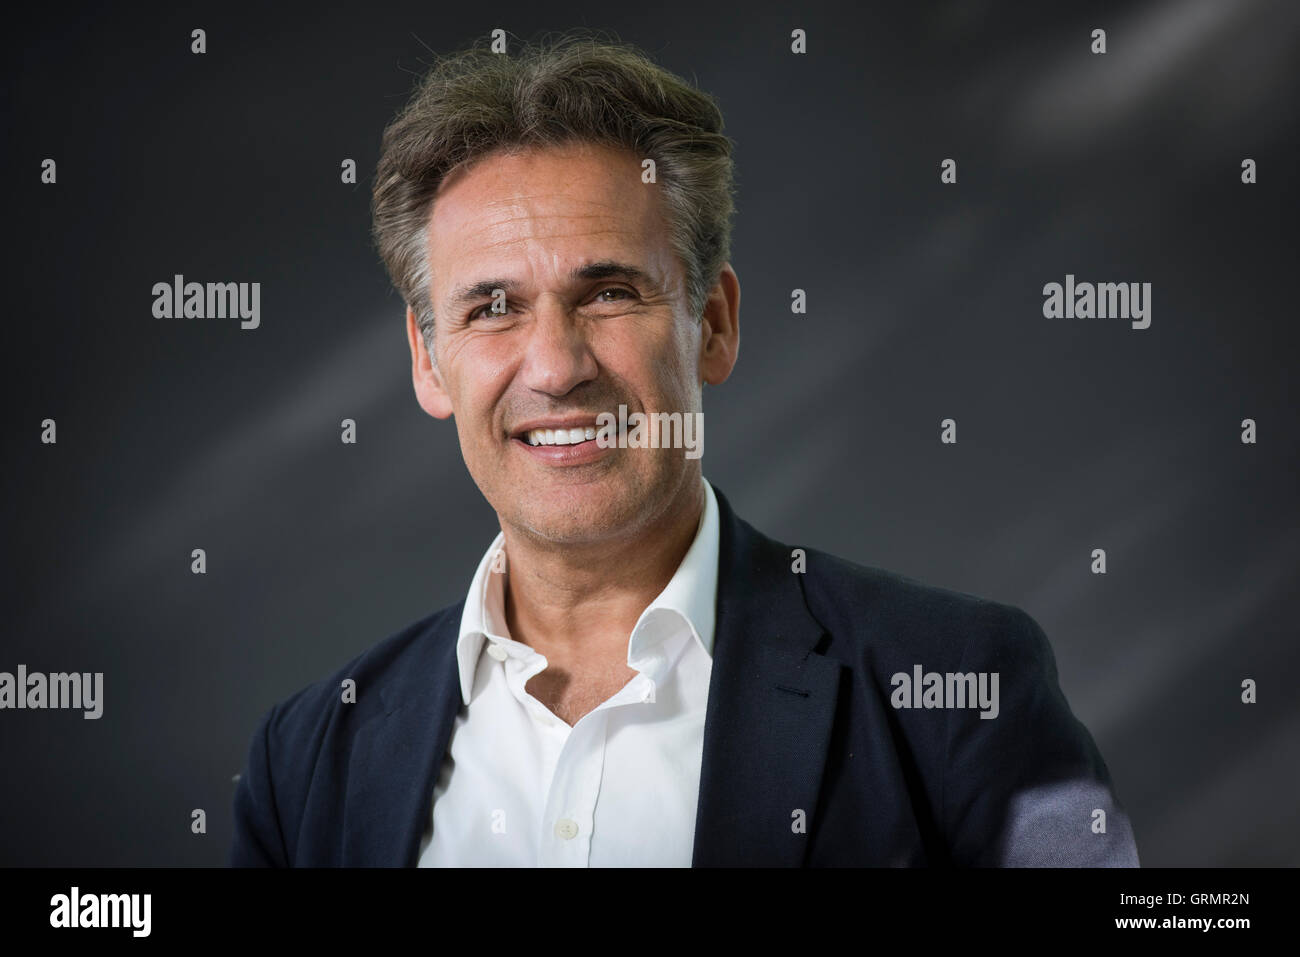 British author, speaker, and independent adviser to international professional firms and national governments Richard Susskind. Stock Photo